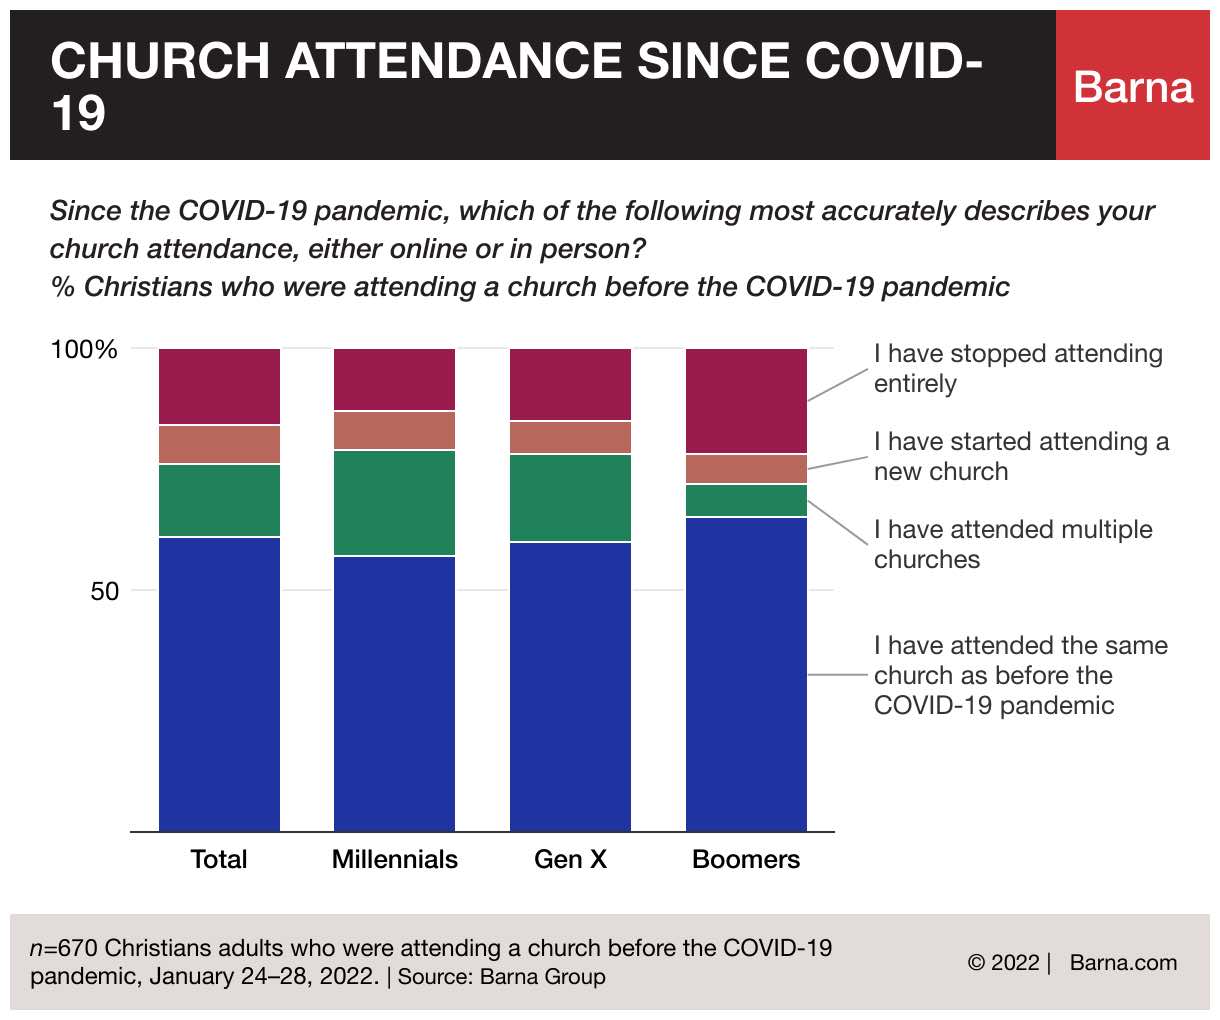 How Generations Attend Church since Covid19